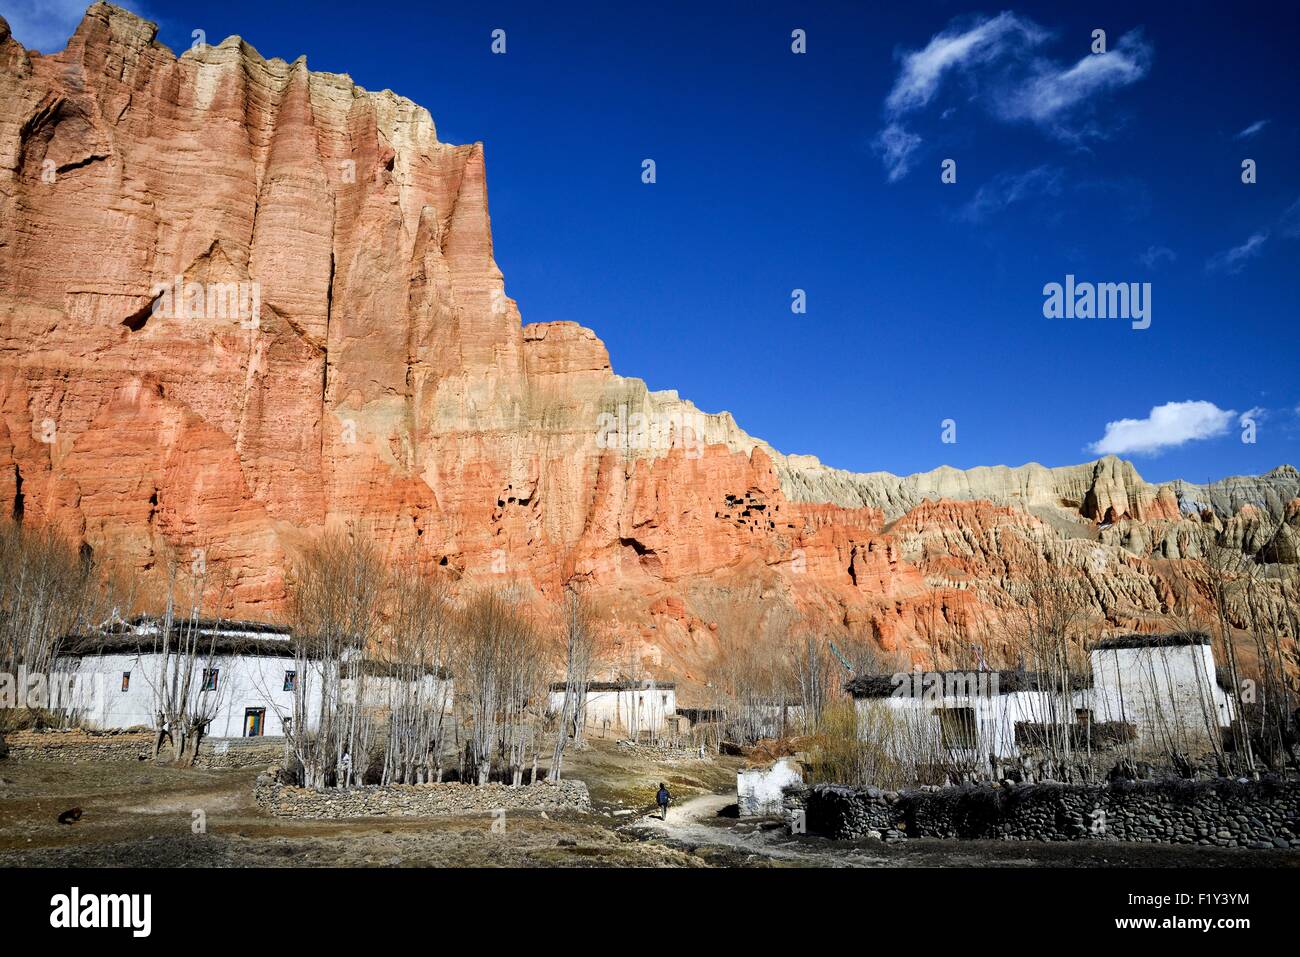 Nepal, Gandaki zone, Upper Mustang (near the border with Tibet), houses in the village of Dhakmar and red cliff with caves Stock Photo